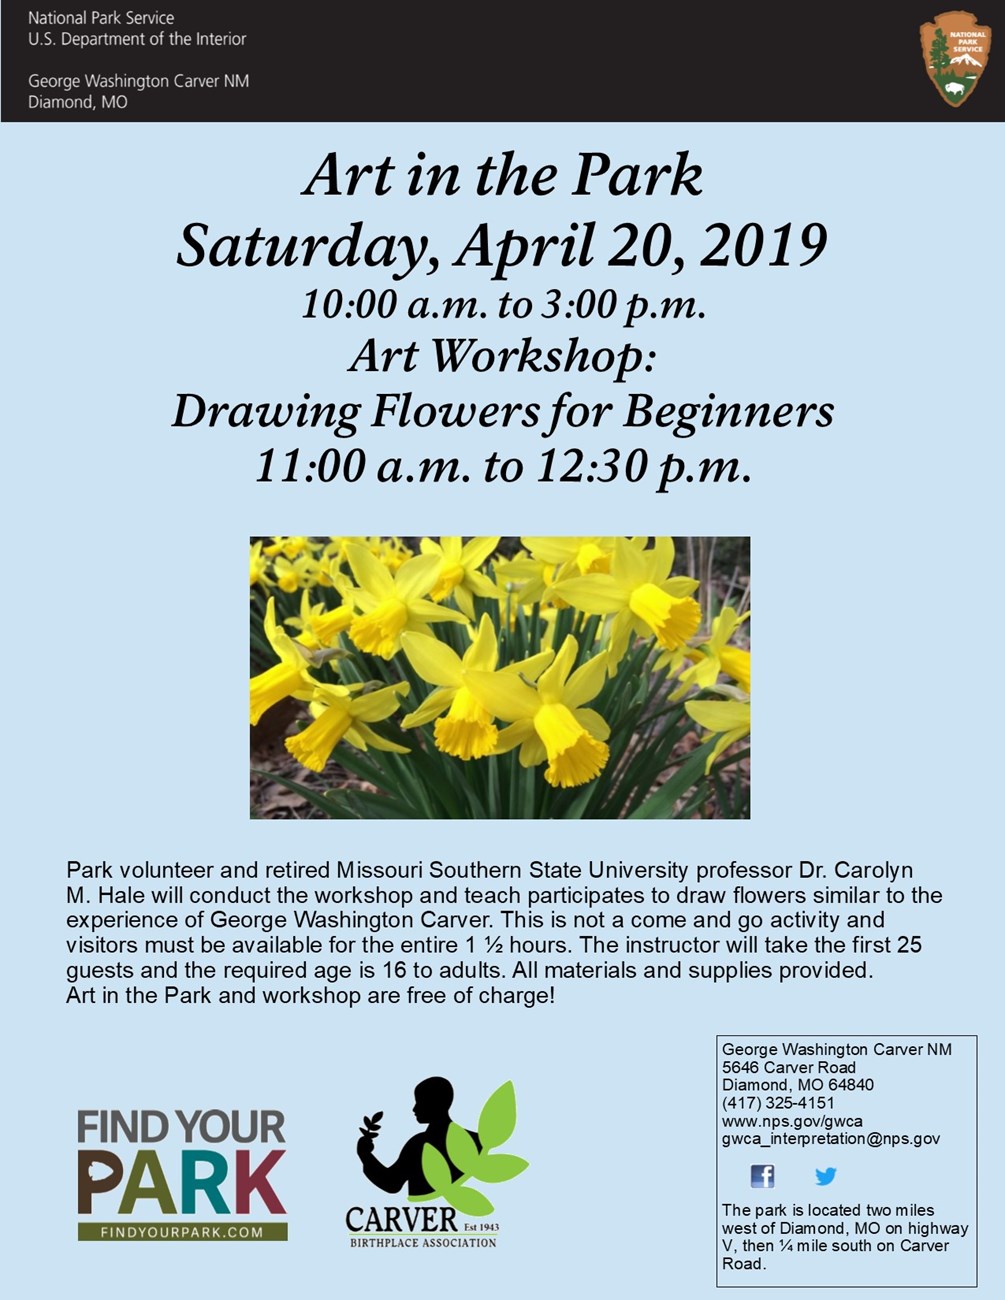 Photograph is for an art workshop. The image includes information about the workshop and a picture of daffodils.